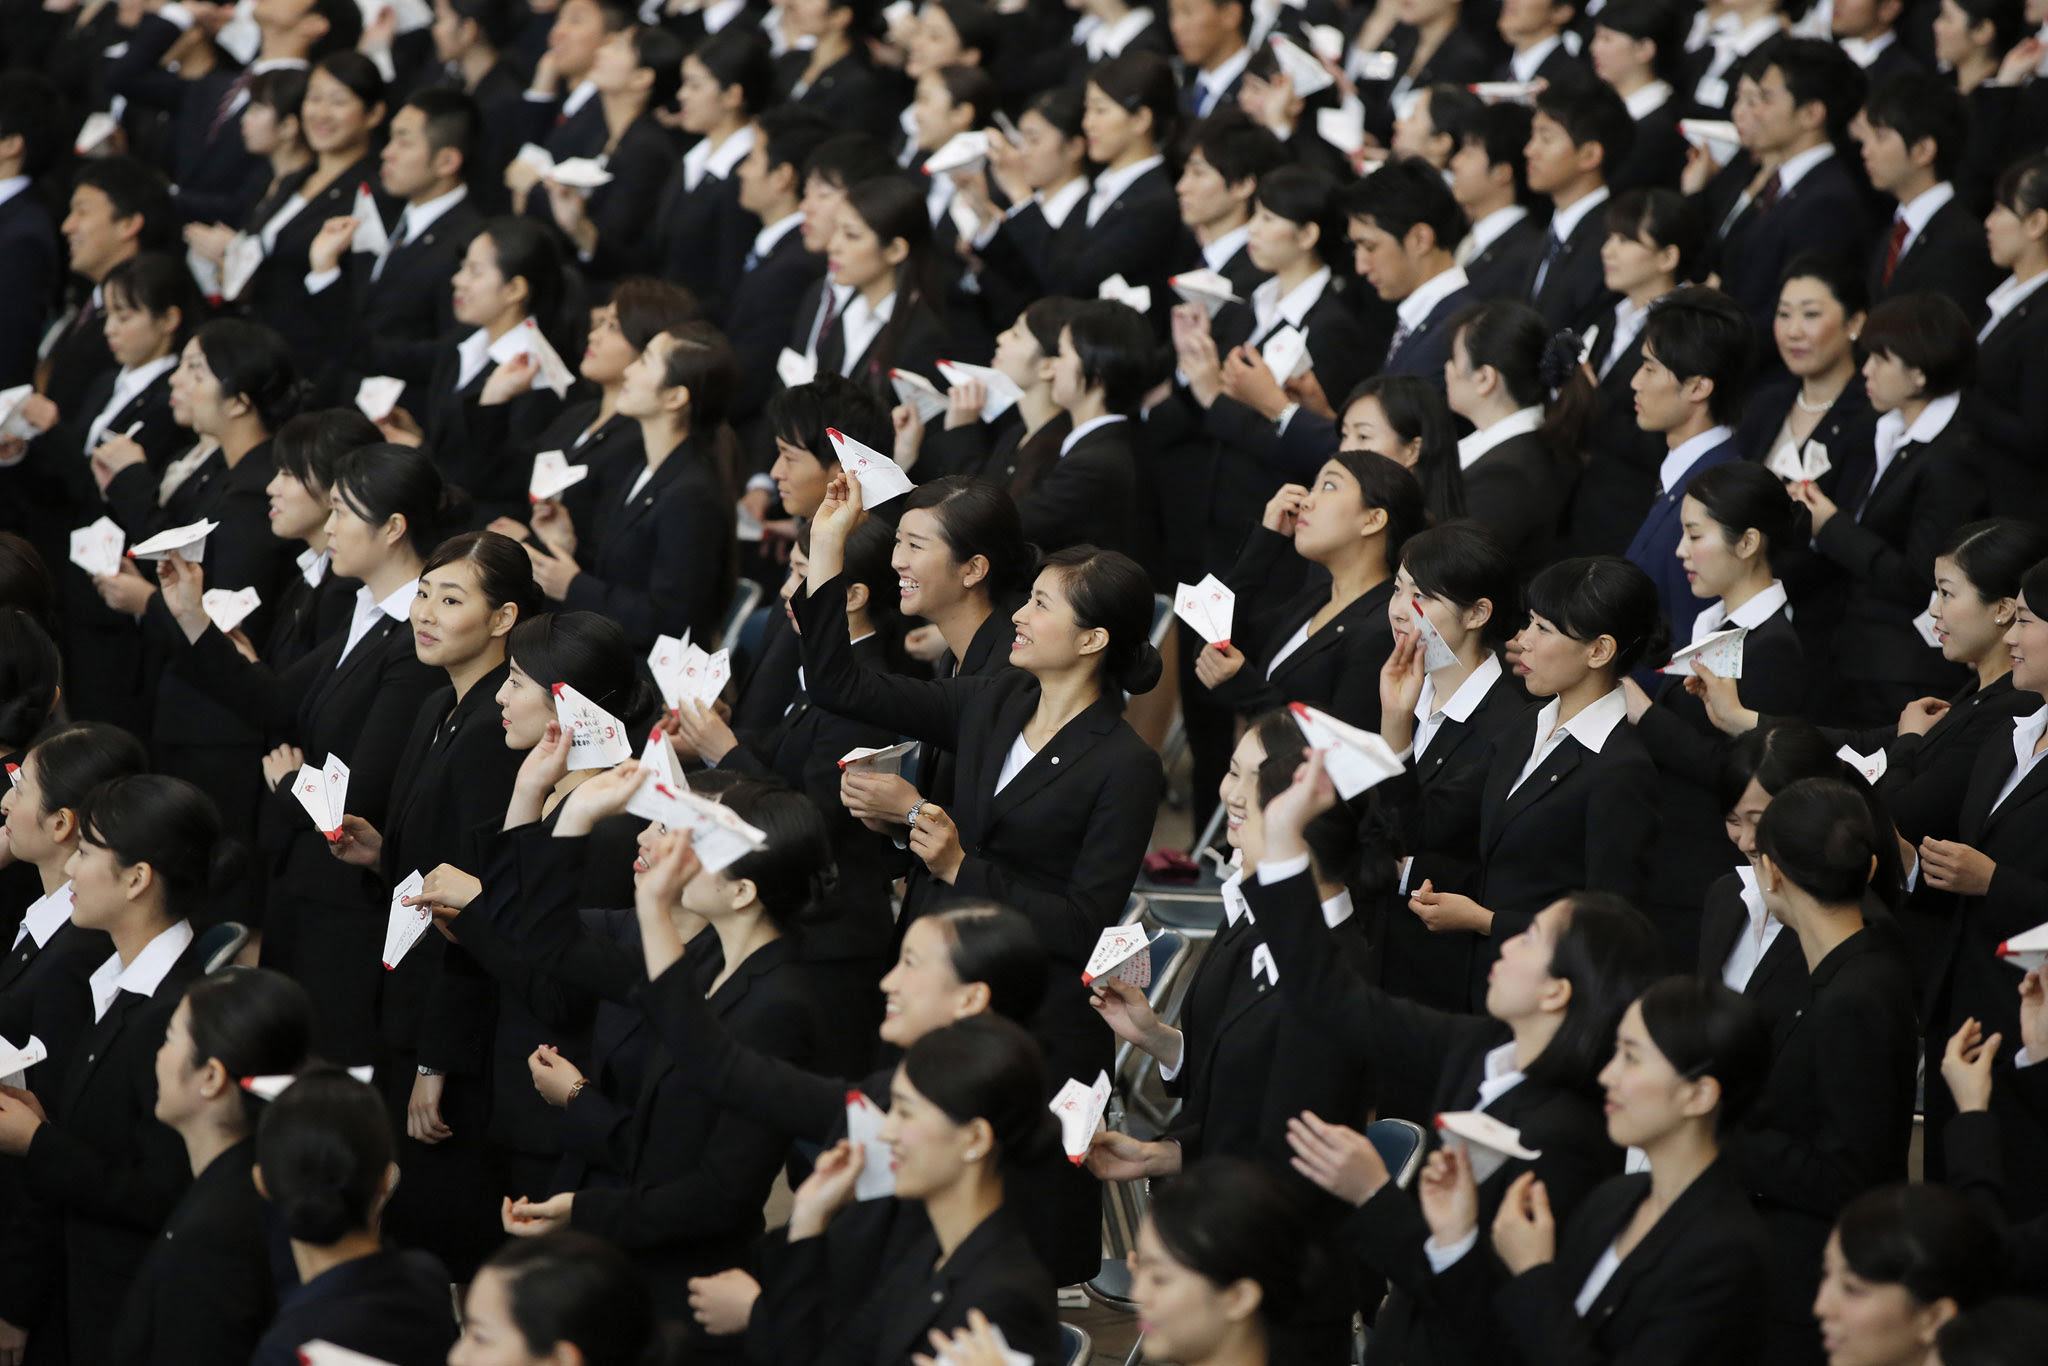 Japan Airlines Co. (JAL) group companies' new employees practice before releasing paper planes during an initiation ceremony at the company's hangar near Haneda Airport in Tokyo, Japan